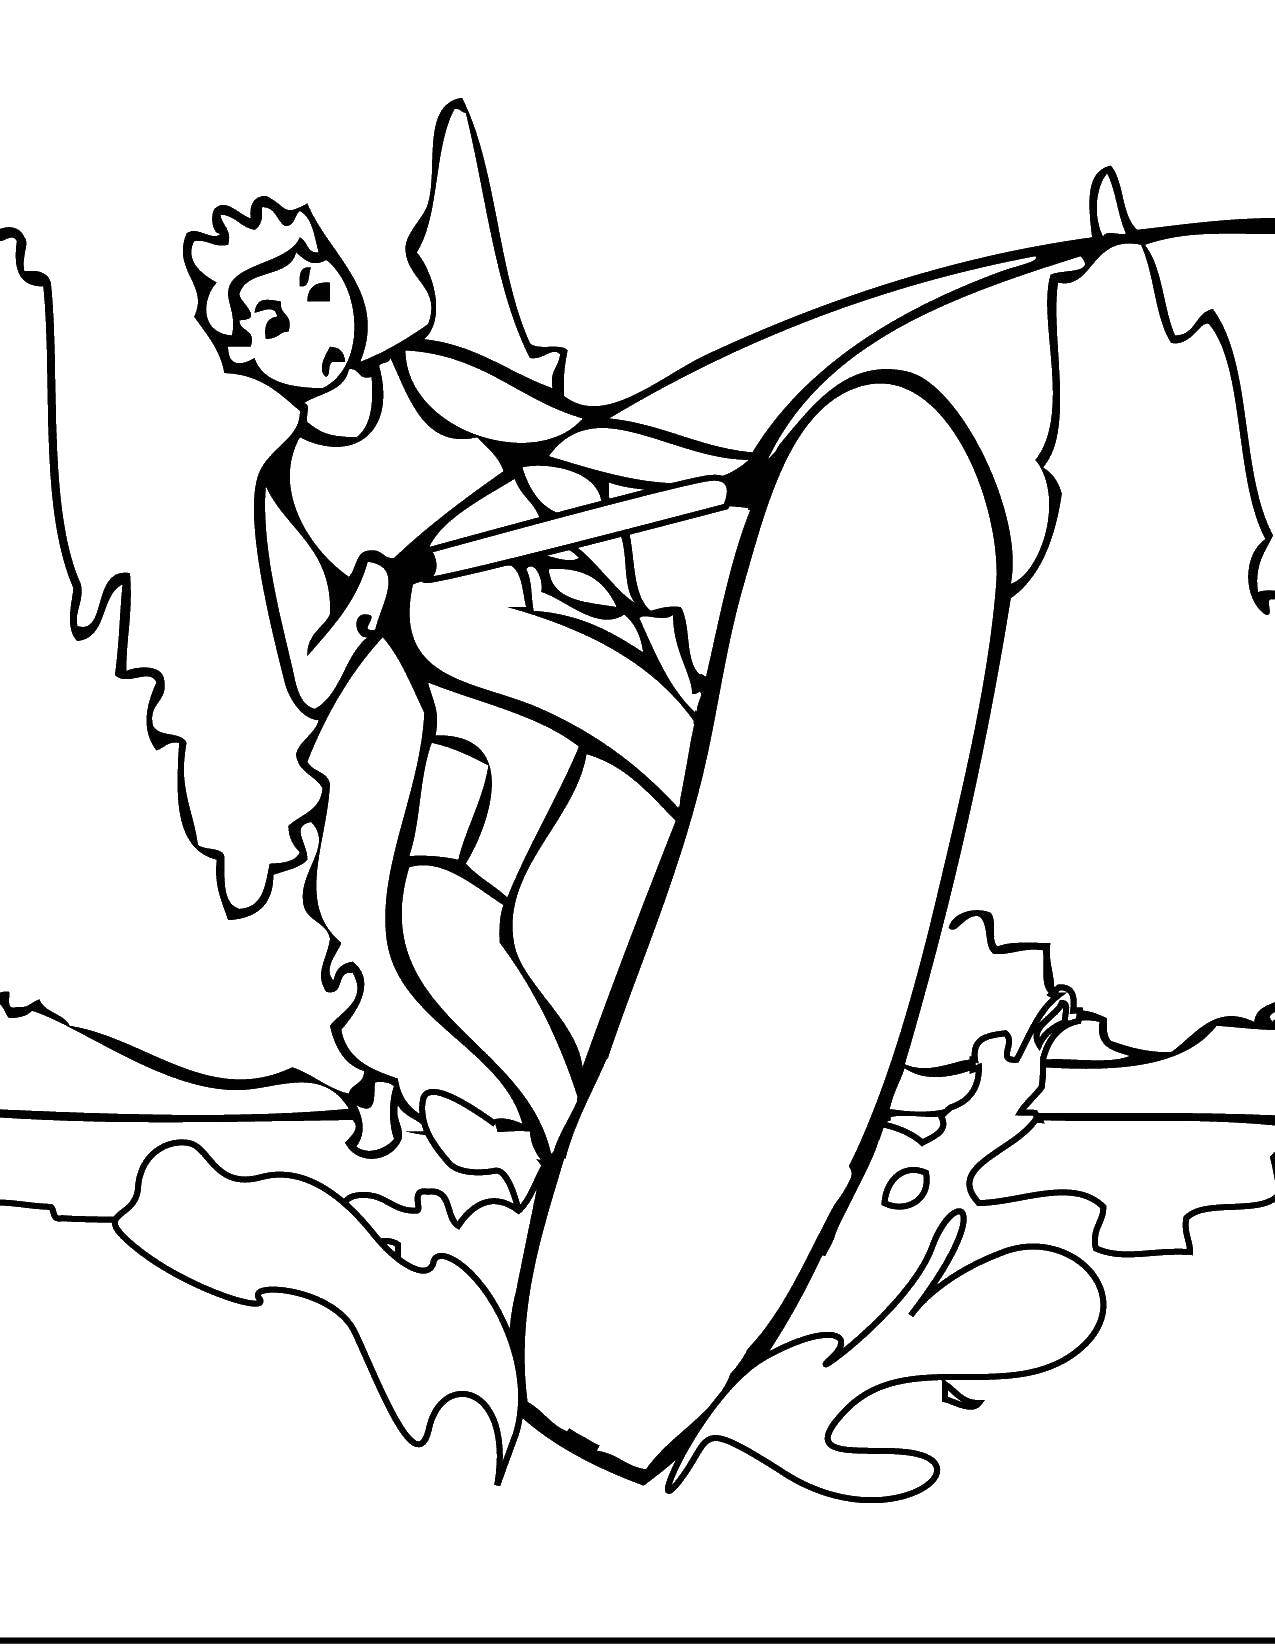 Coloring Surfer. Category Sports. Tags:  sports, surfer, surfing.